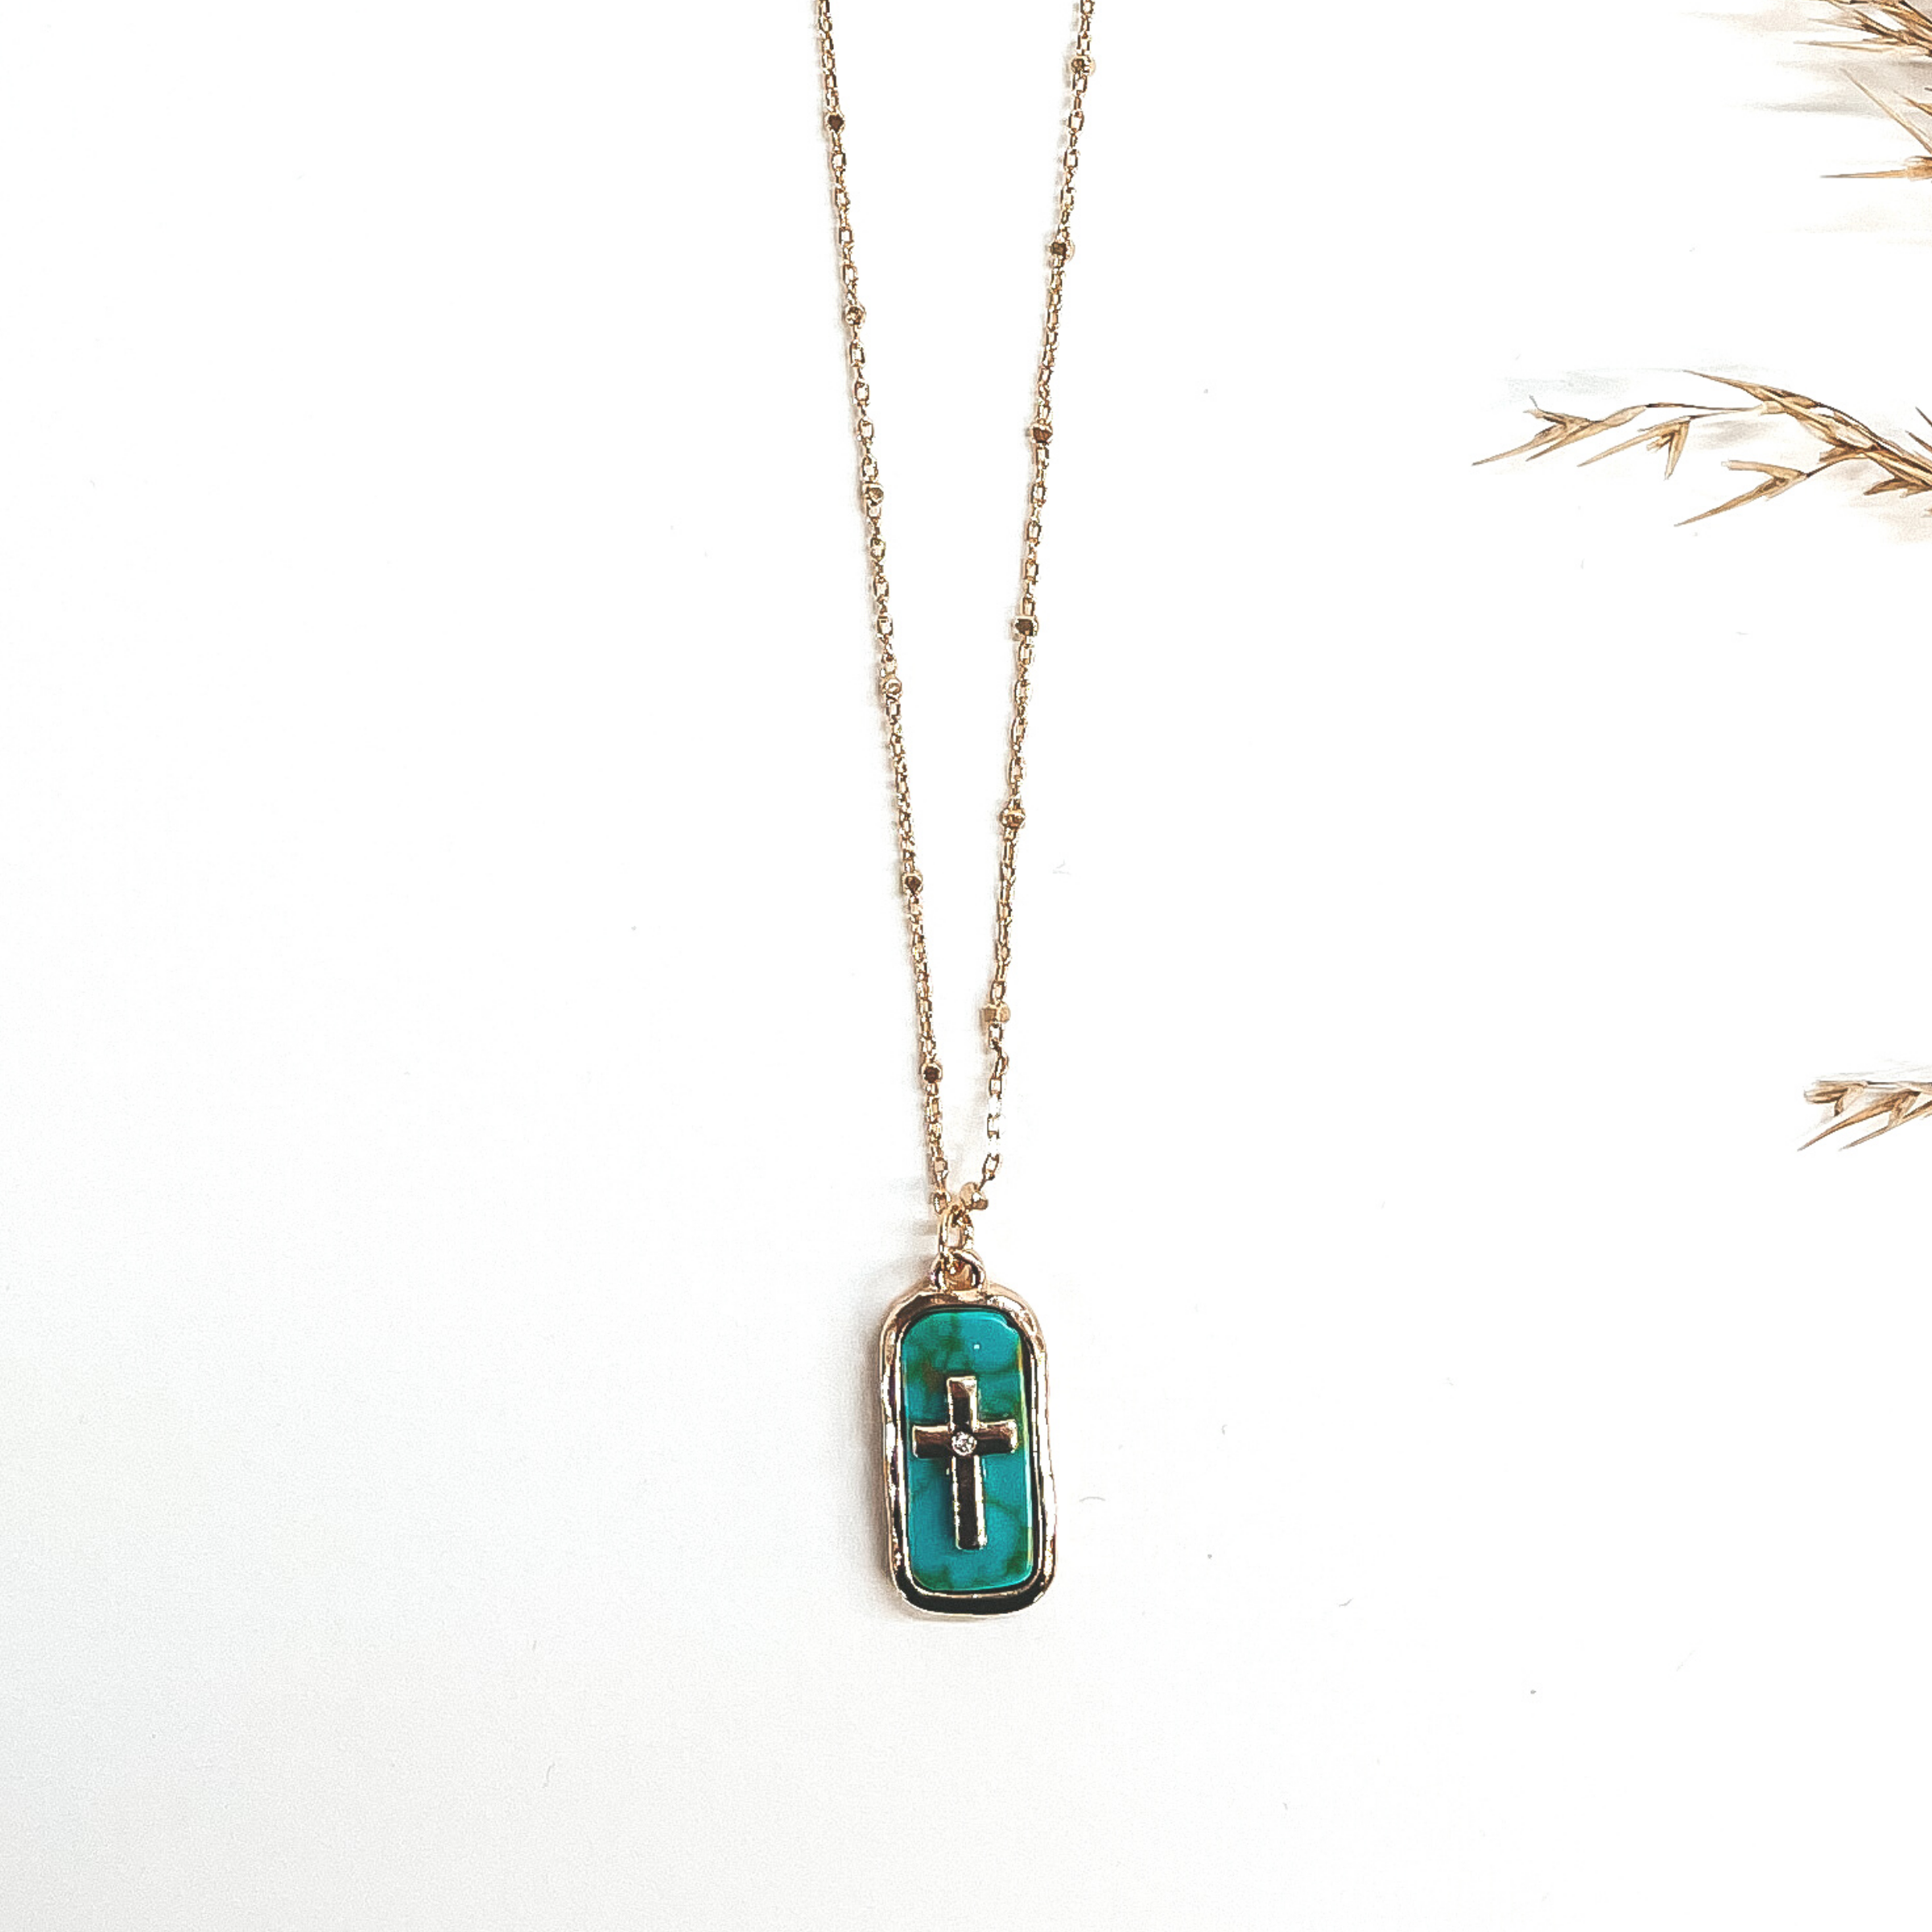 This a gold chain necklace with a rectangular pendant, pendant is a semi-precious stone in turquoise. It  has a gold cross in the center with a small clear  crystal in the center of the cross. The chain has gold spacers. This is  taken on a white background with a brown plant in the  side as decor.